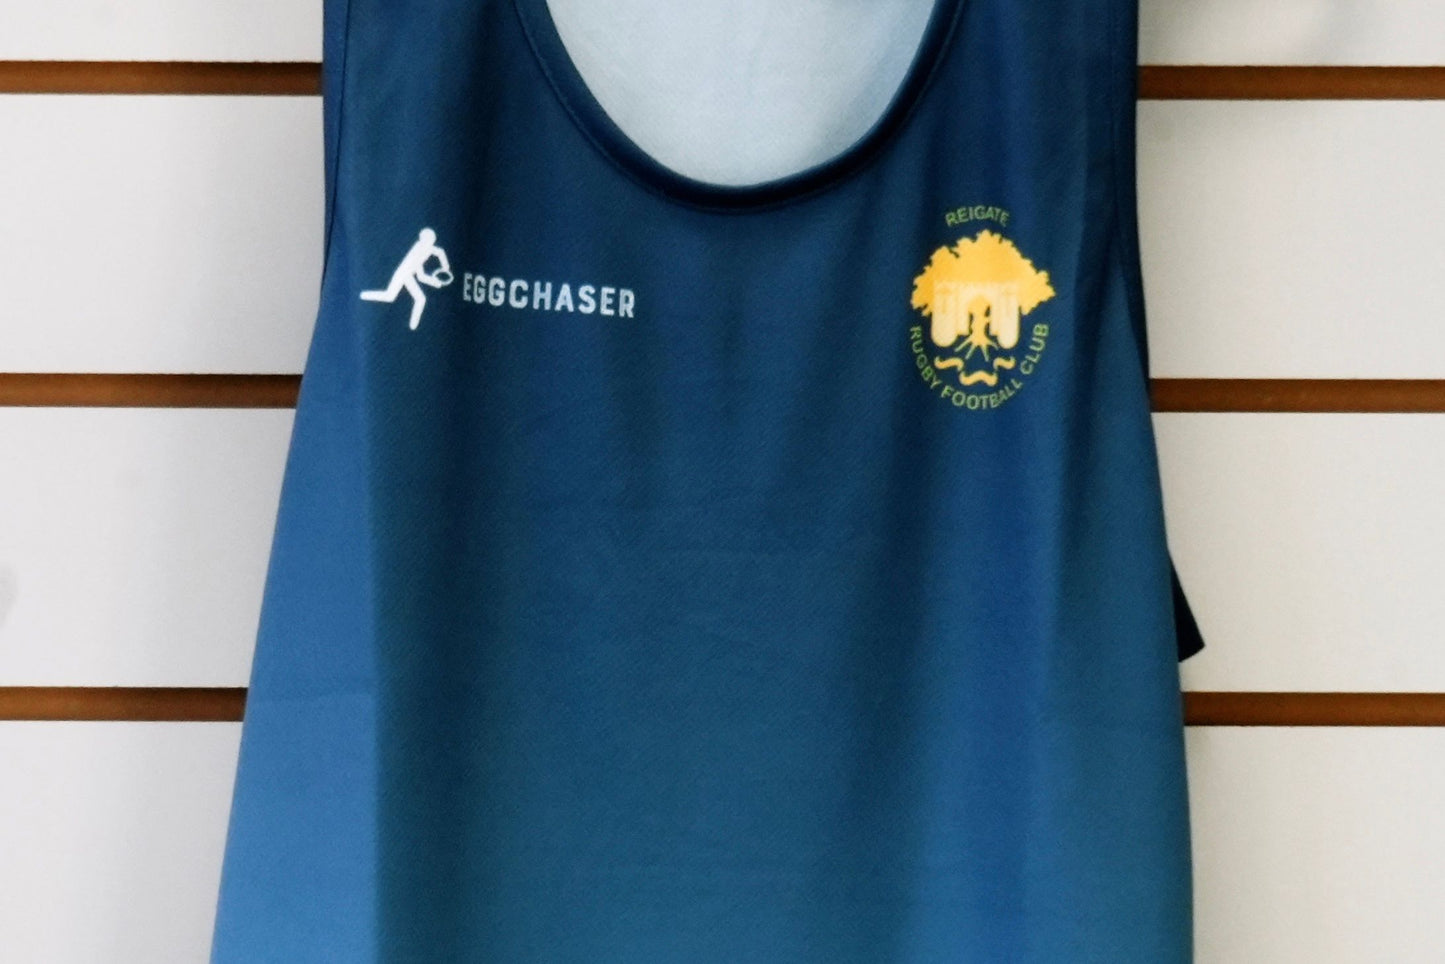 Reigate Rugby Vest